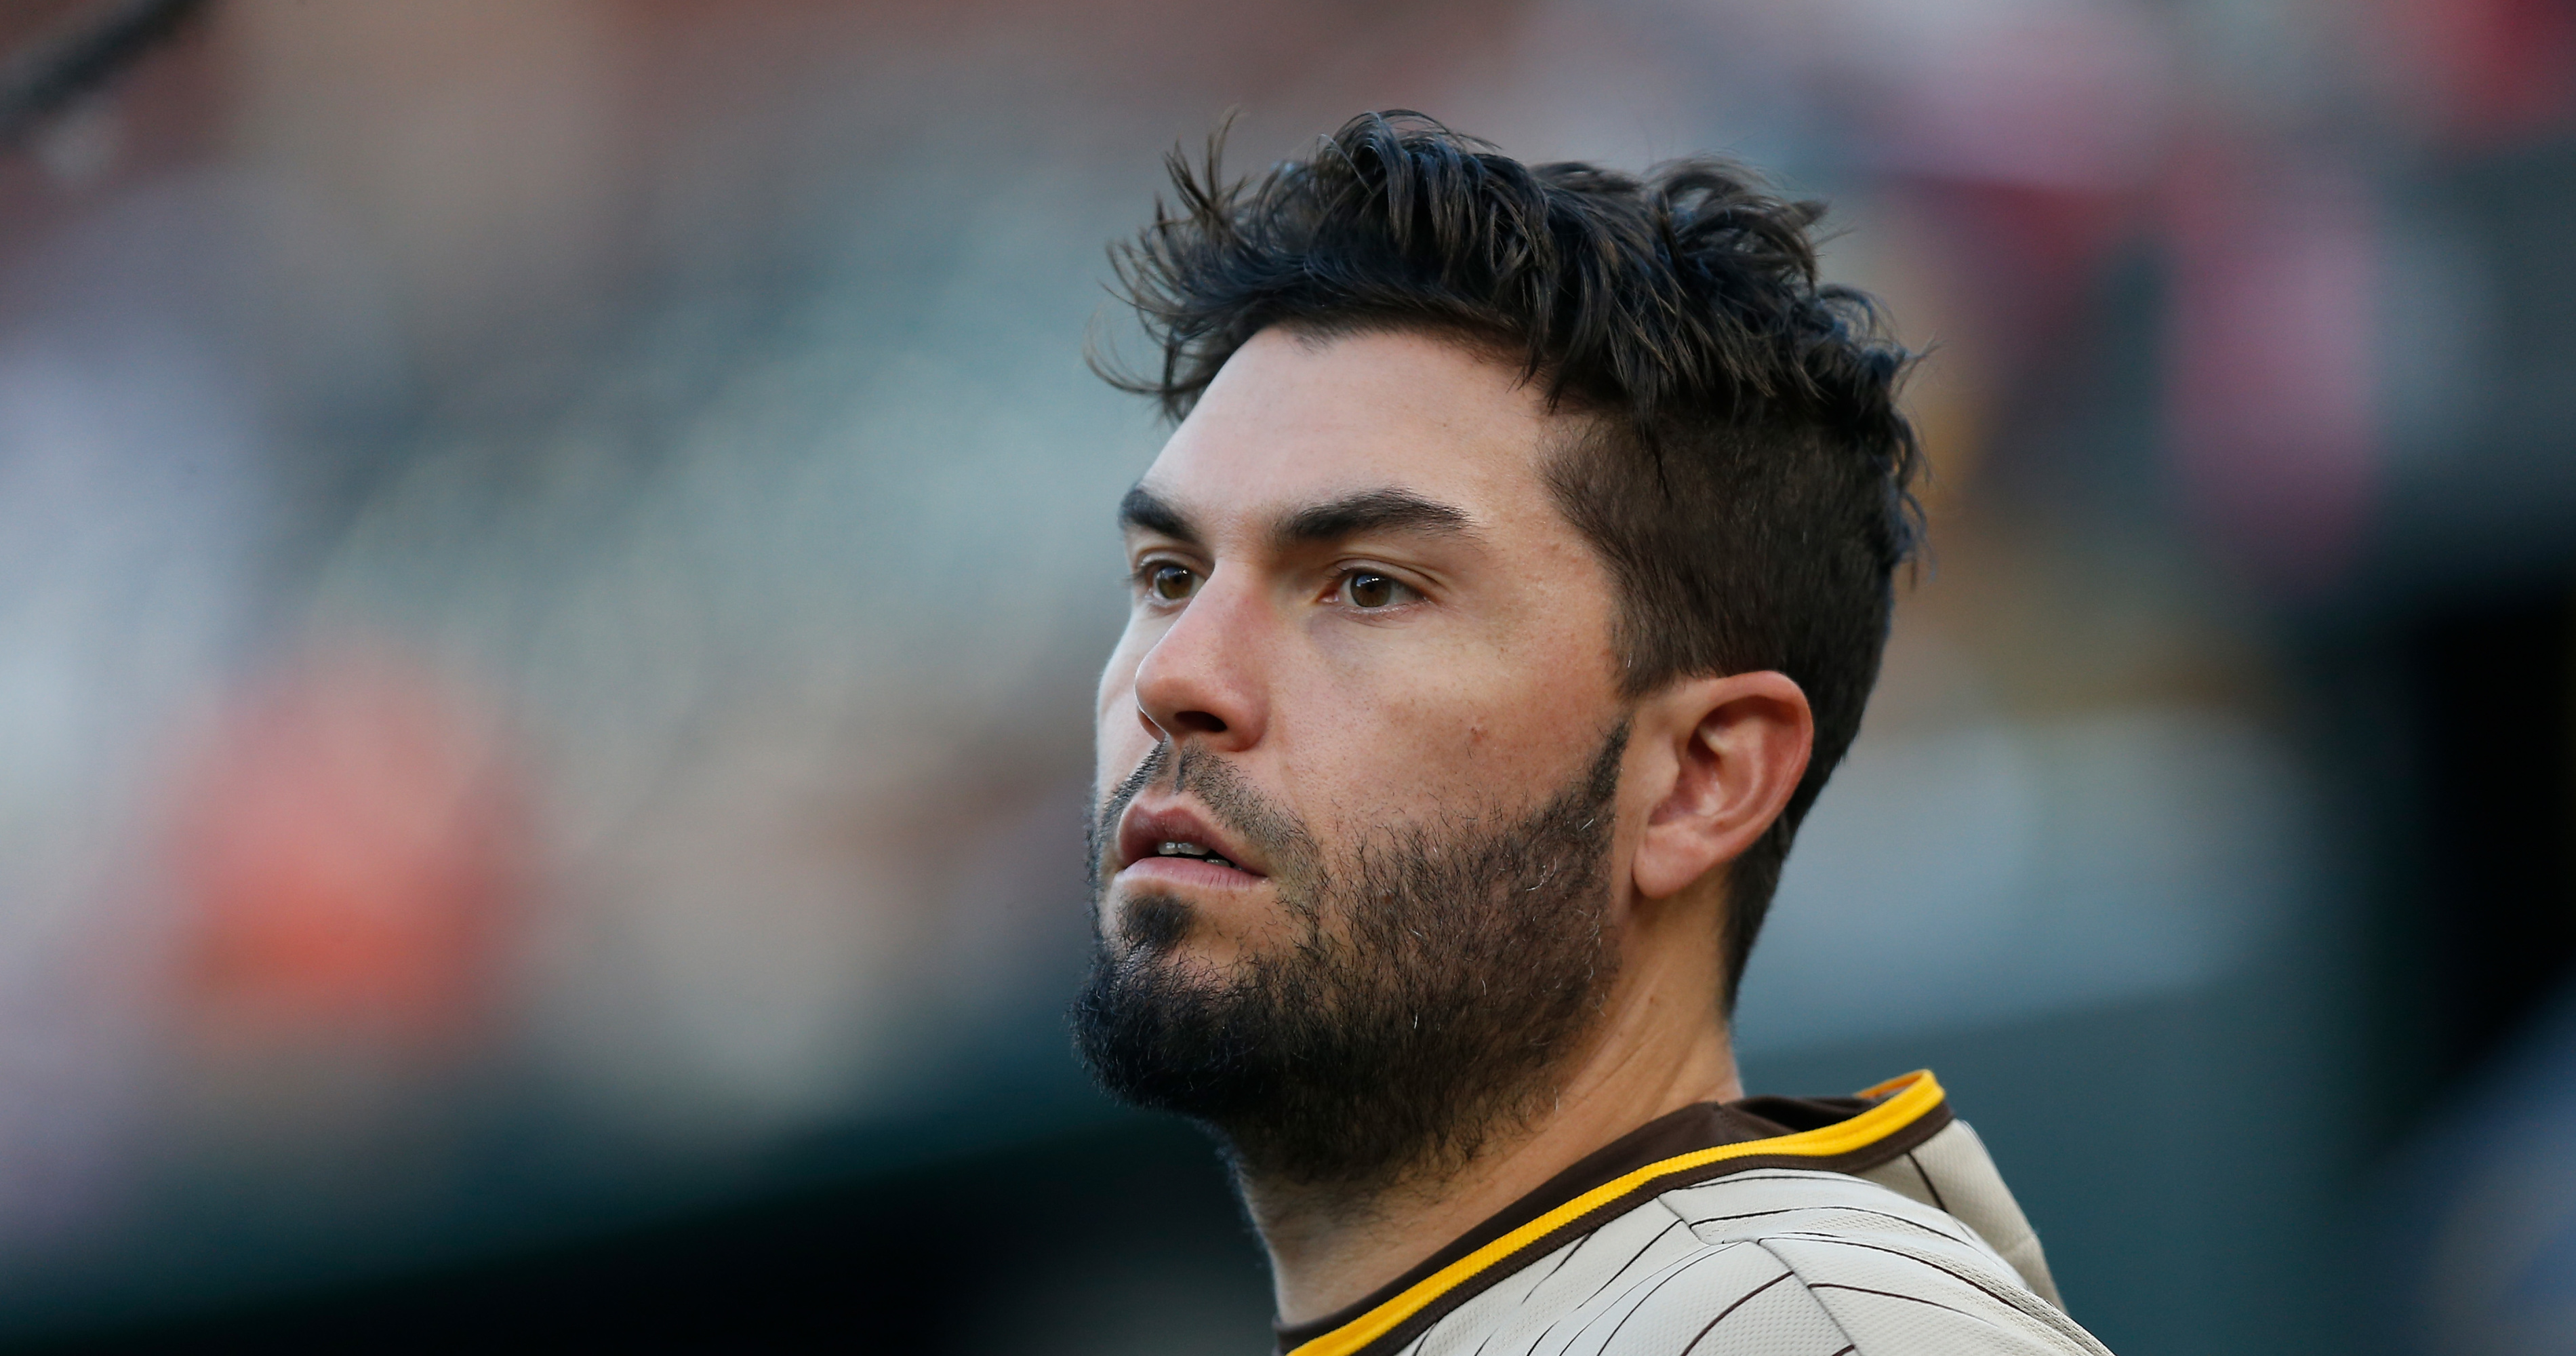 Report: Eric Hosmer Declines to Waive No-Trade Clause in Juan Soto Padres-Nats Deal